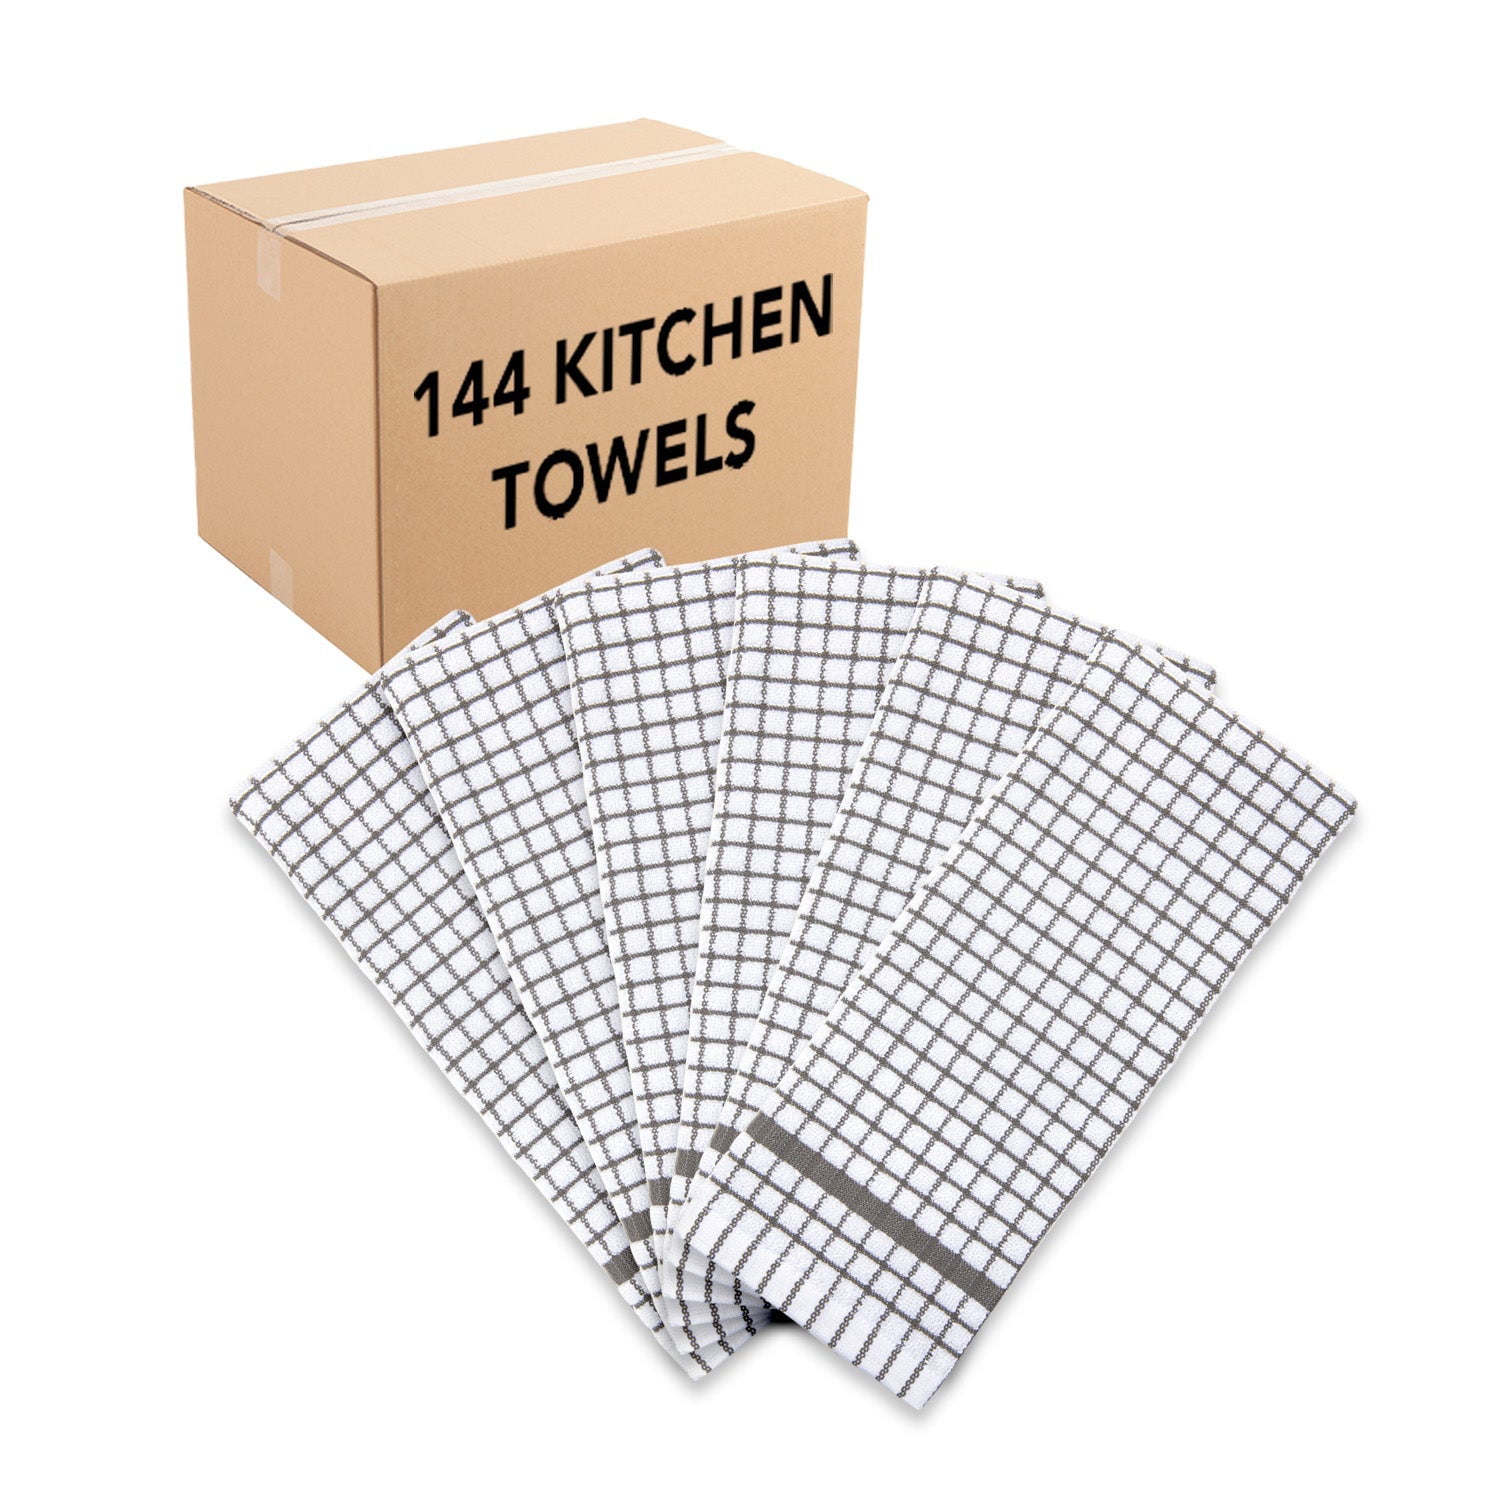 Arkwright Classic Checkered Kitchen Towels (Bulk Case of 144), Cotton,  15x25 in., Gray and White Pattern